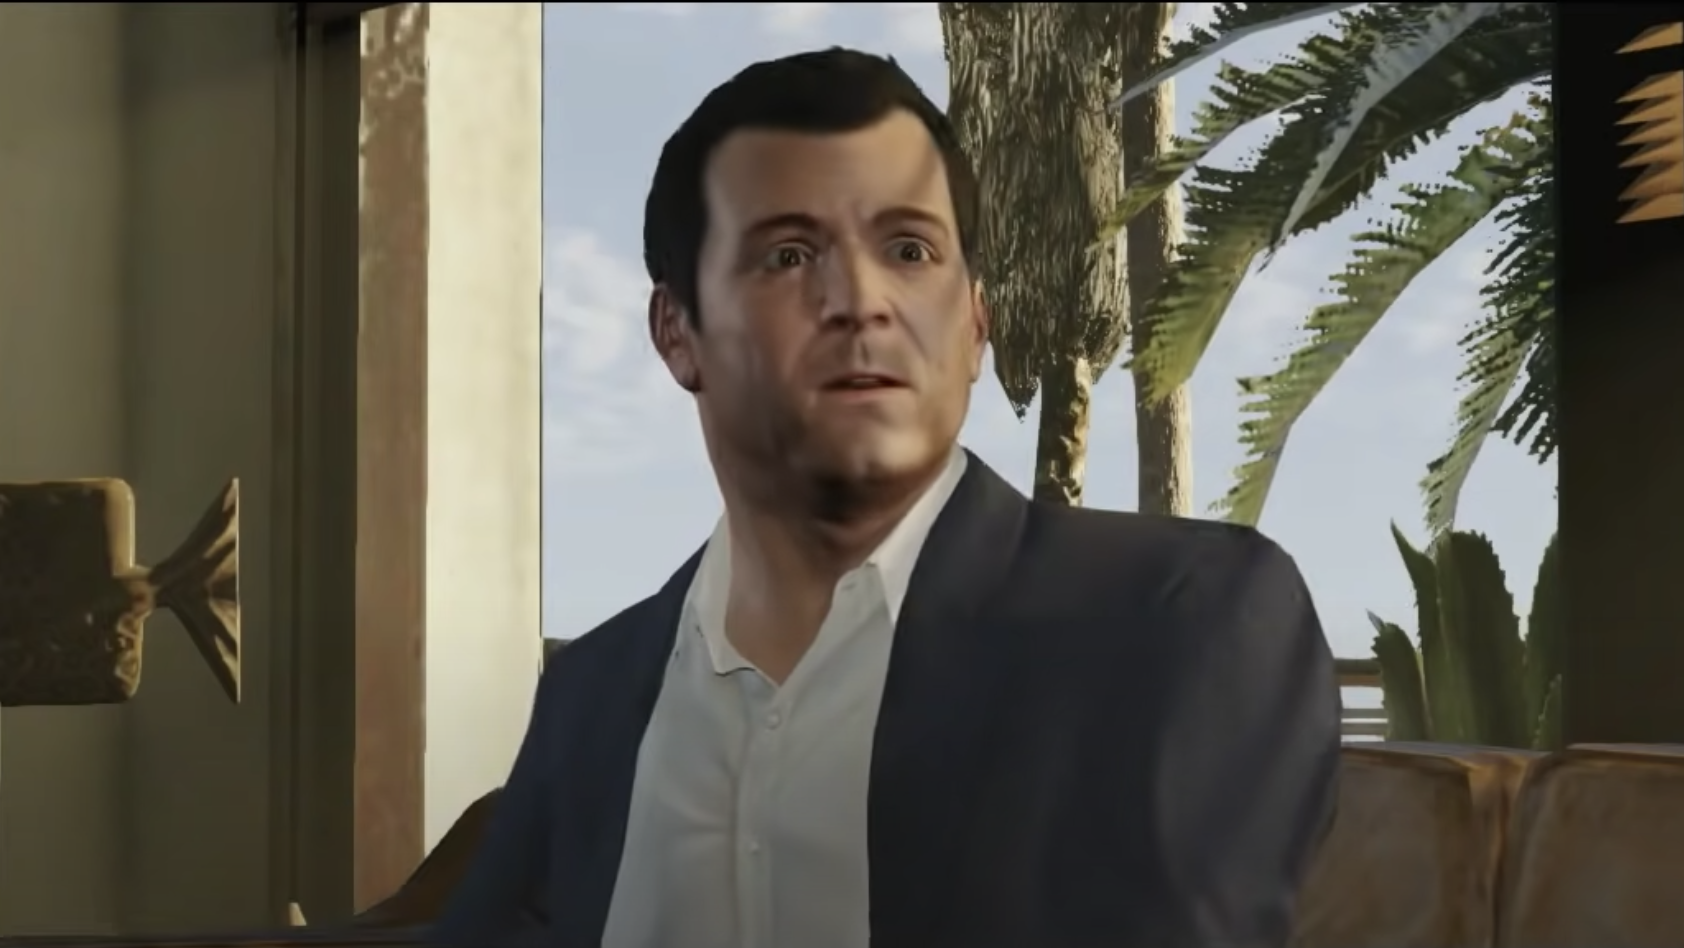 GTA 5 source code reportedly leaked online a year after Rockstar hack